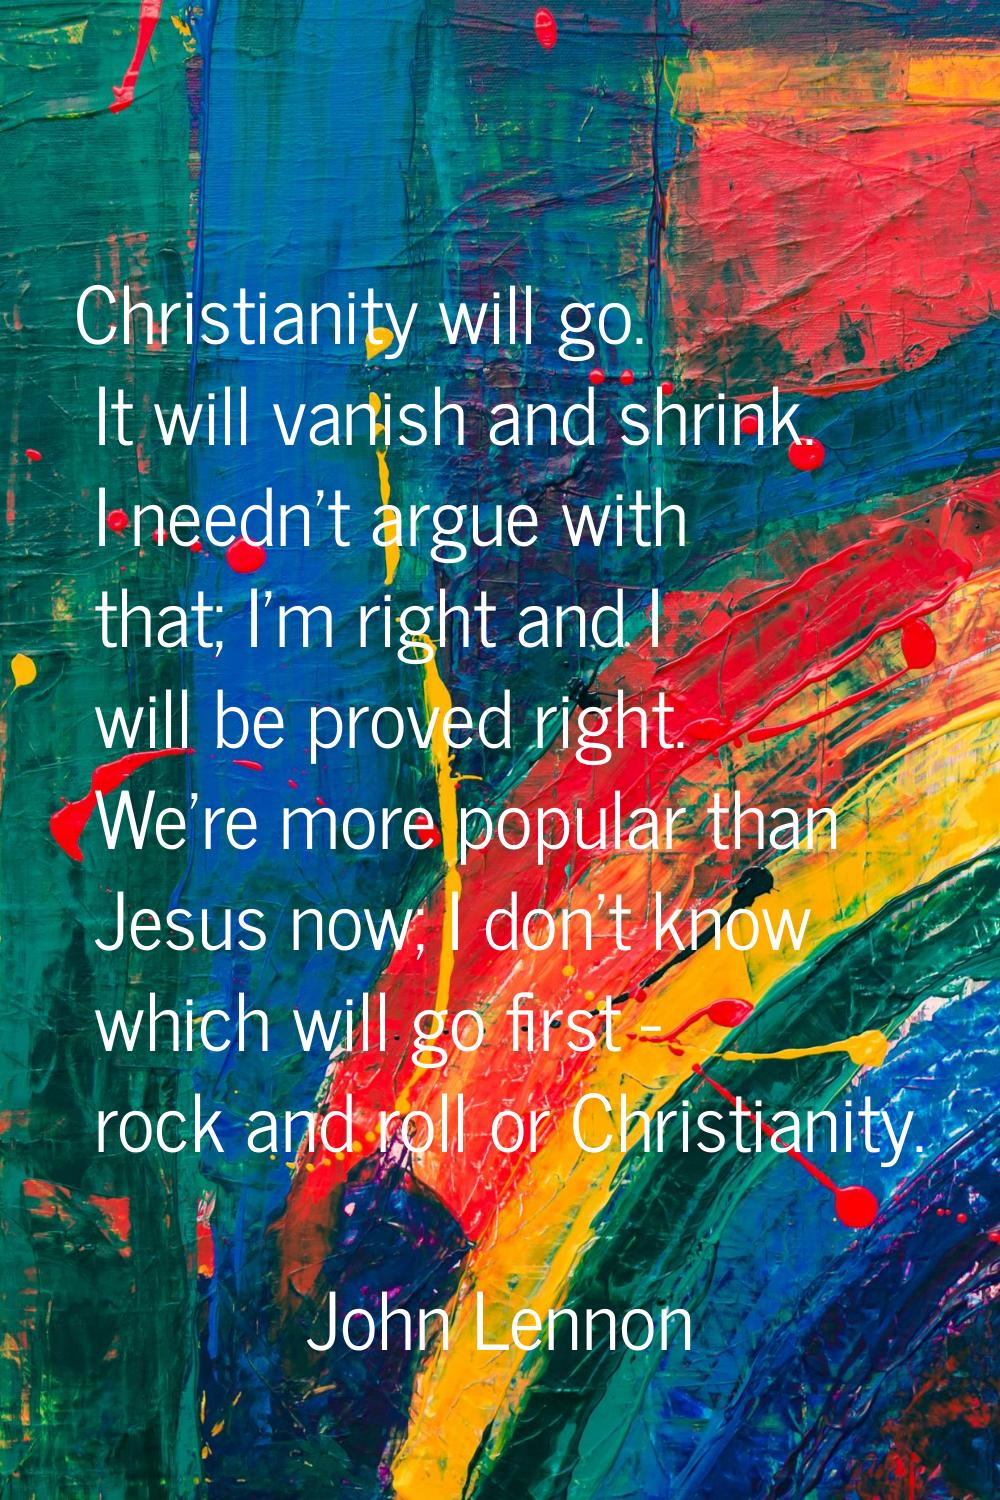 Christianity will go. It will vanish and shrink. I needn't argue with that; I'm right and I will be